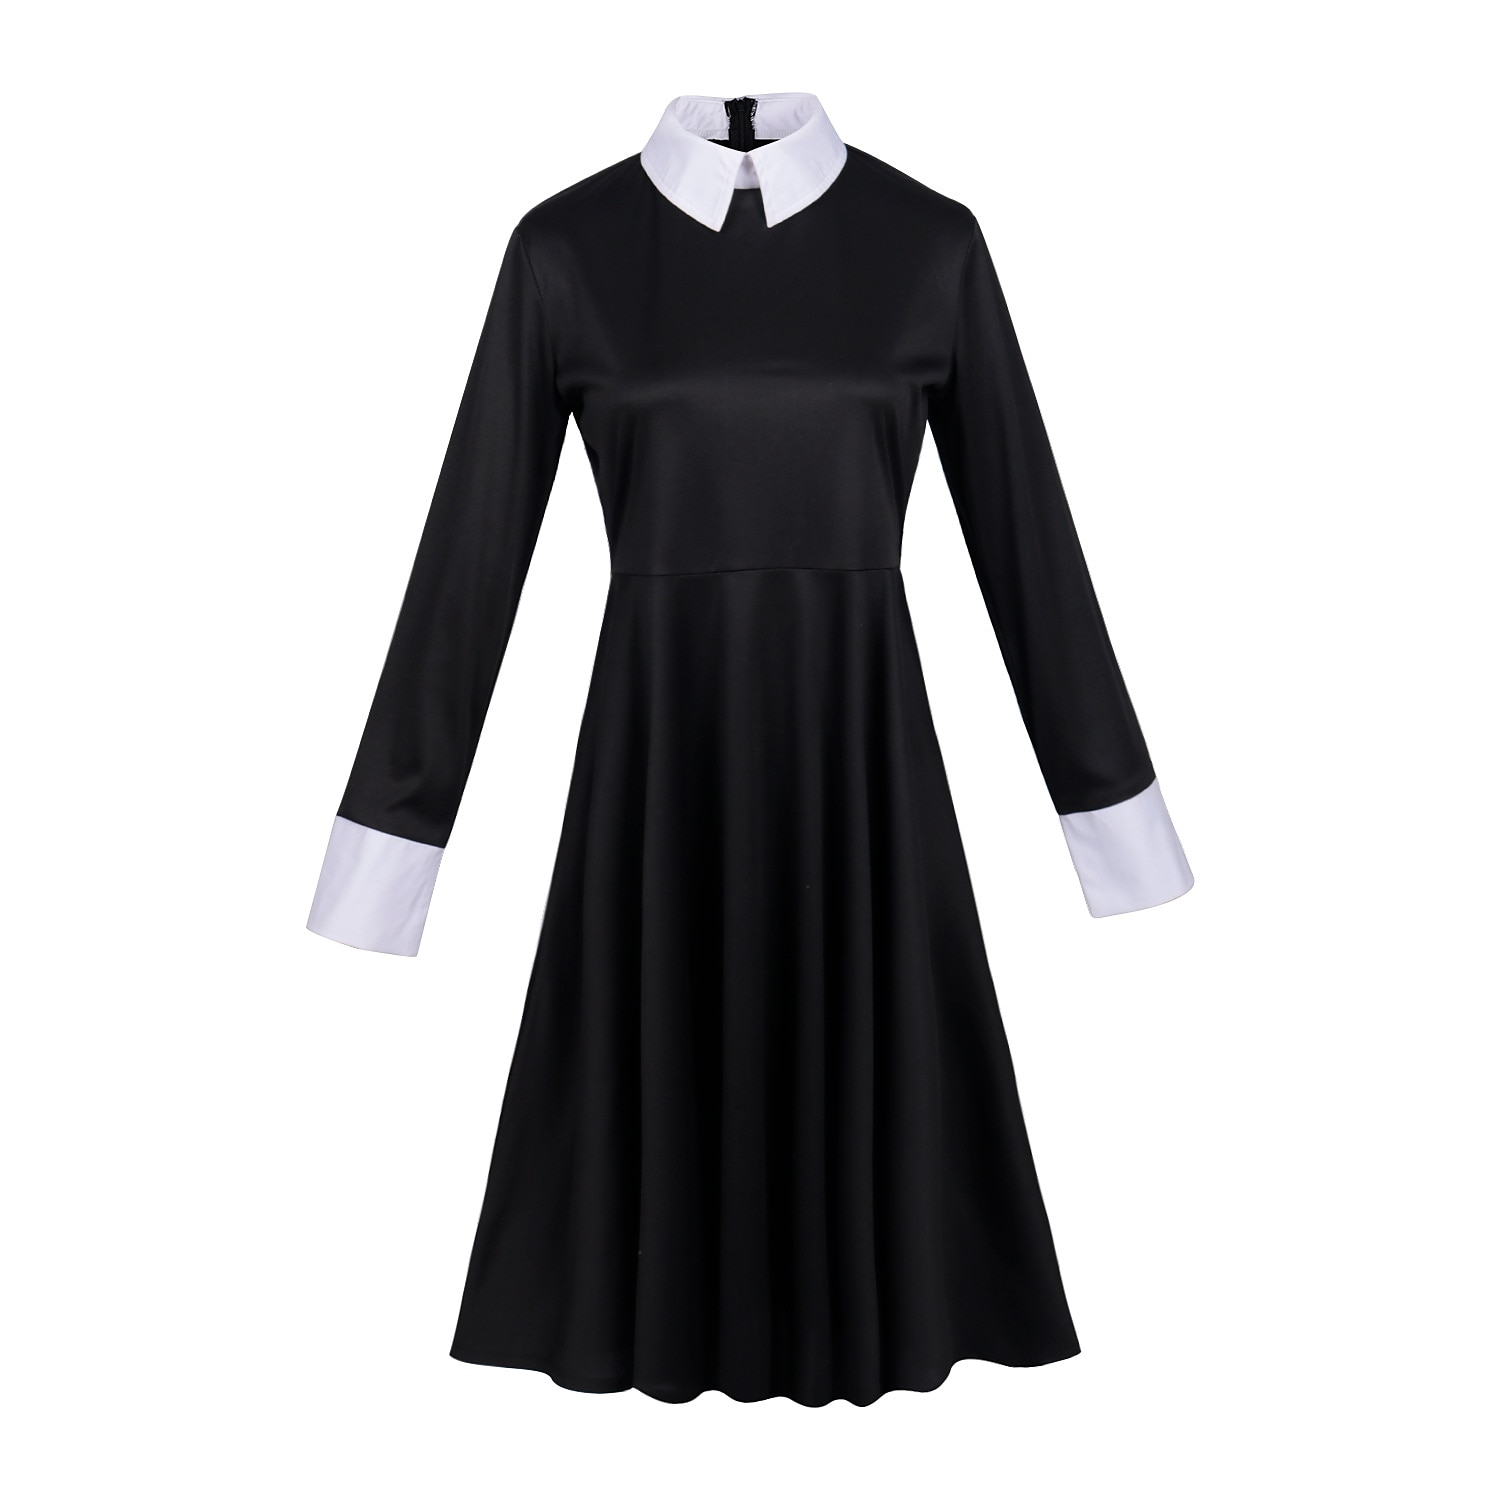 The Addams Family Wednesday Addams Wednesday Party Black Dress Cosplay  Women NEW